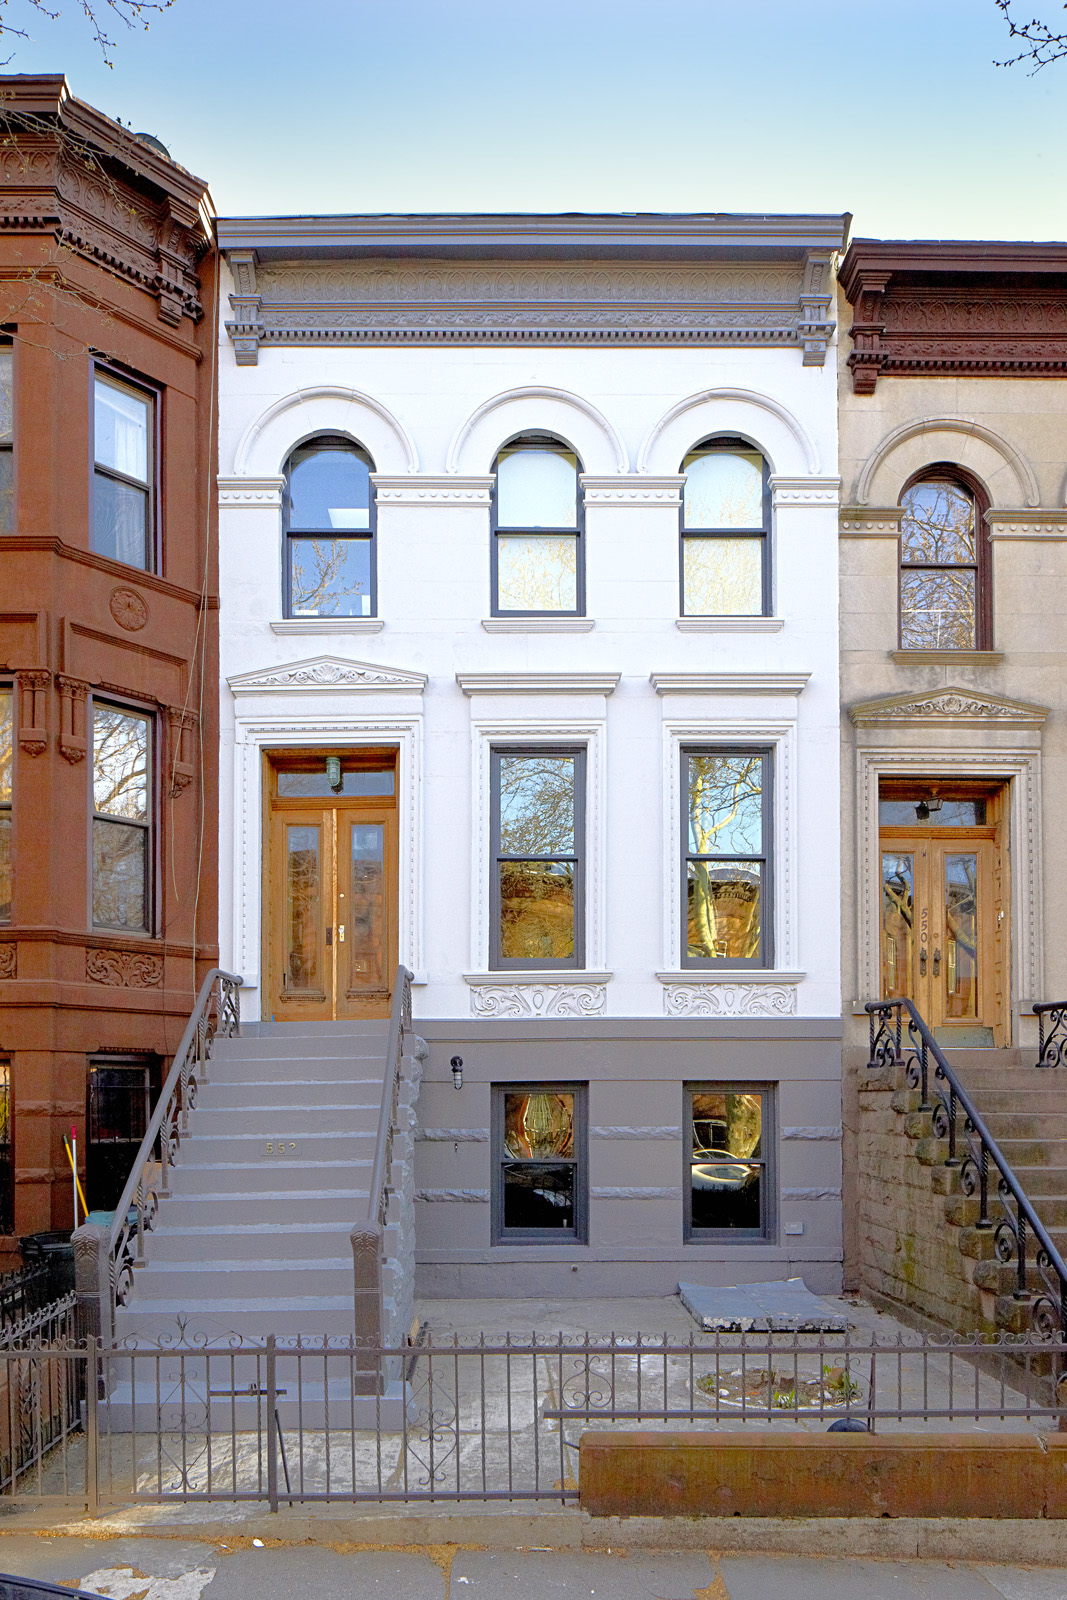 The rowhouse facade was restored its original color and finish.